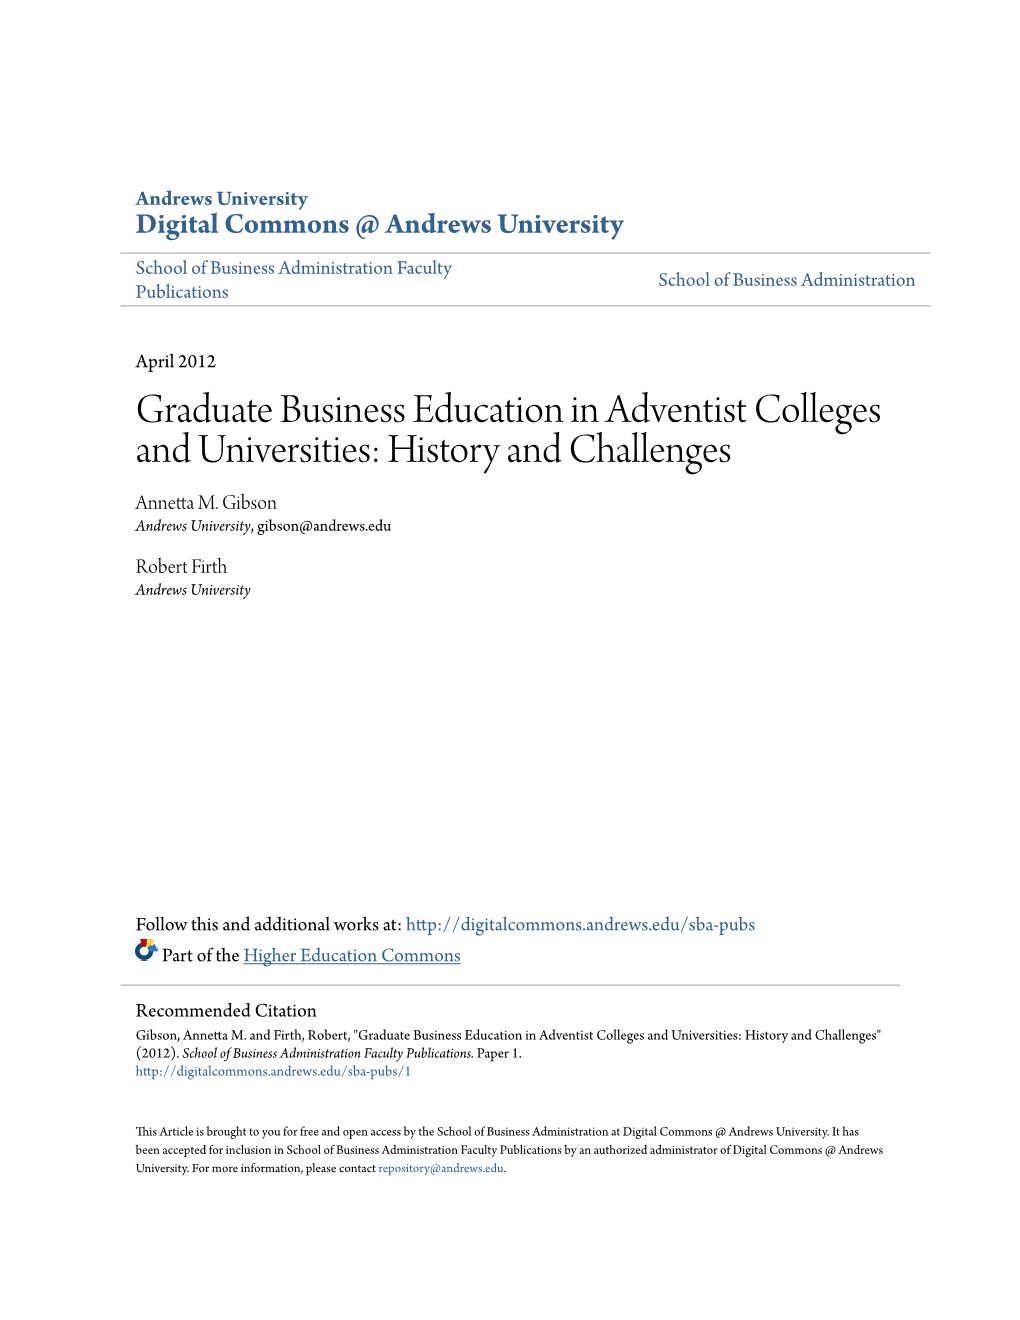 Graduate Business Education in Adventist Colleges and Universities: History and Challenges Annetta M